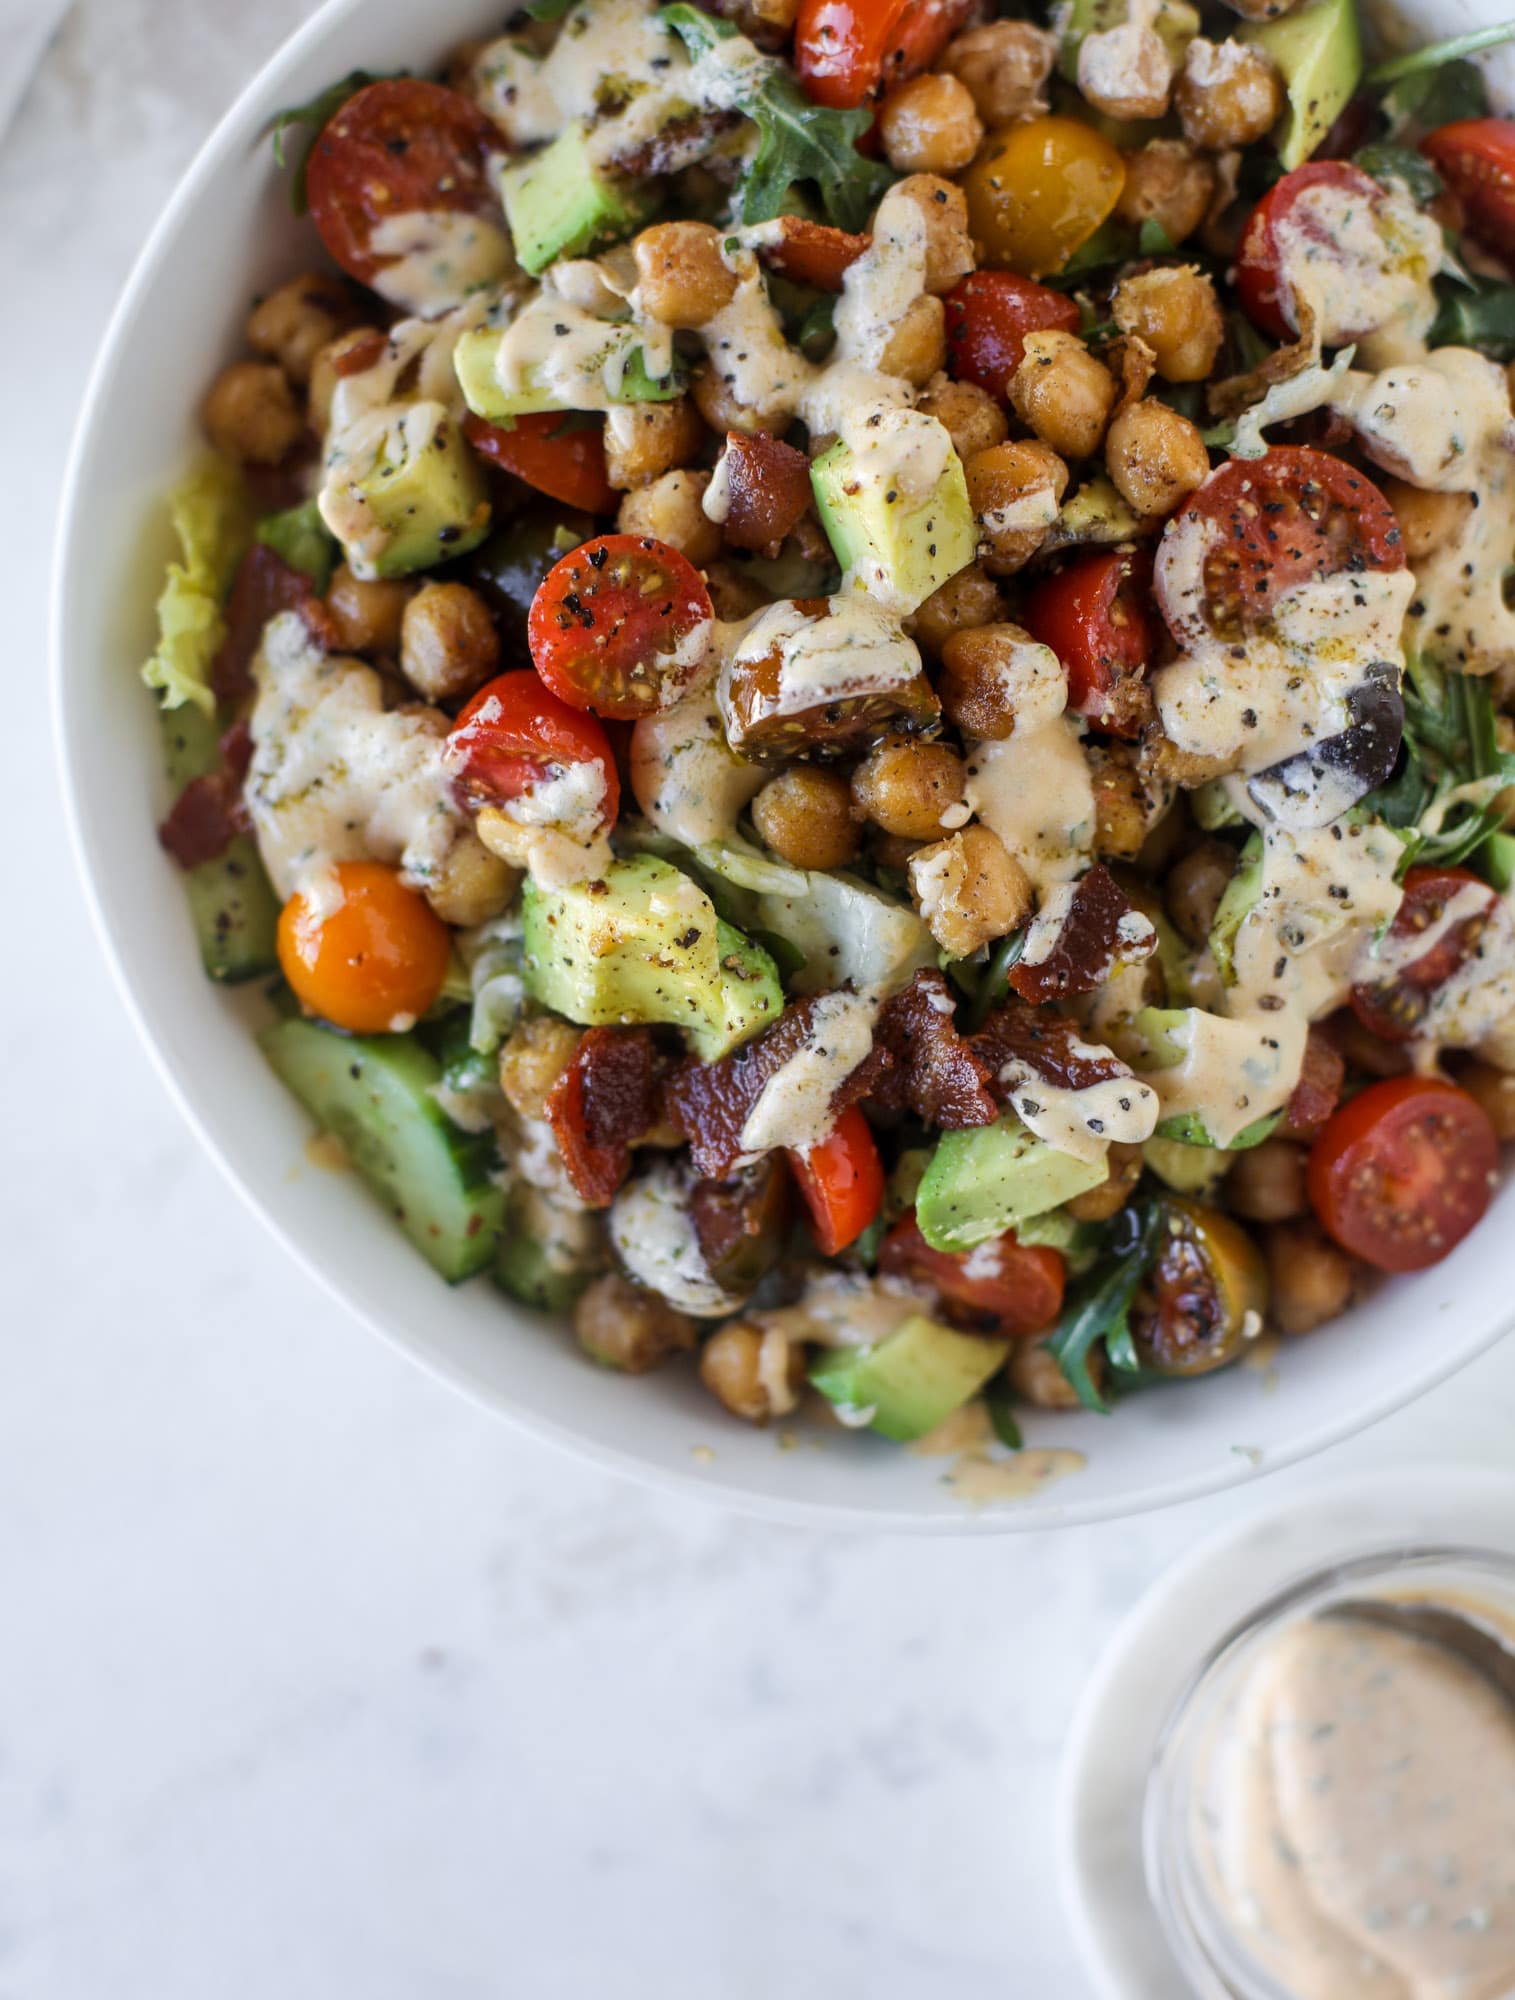 The chickpea bacon ranch salad has a ton of crispy, crunchy texture and flavor. It's satisfying and super easy to prep ahead of time too! I howsweeteats.com #chickpea #salad